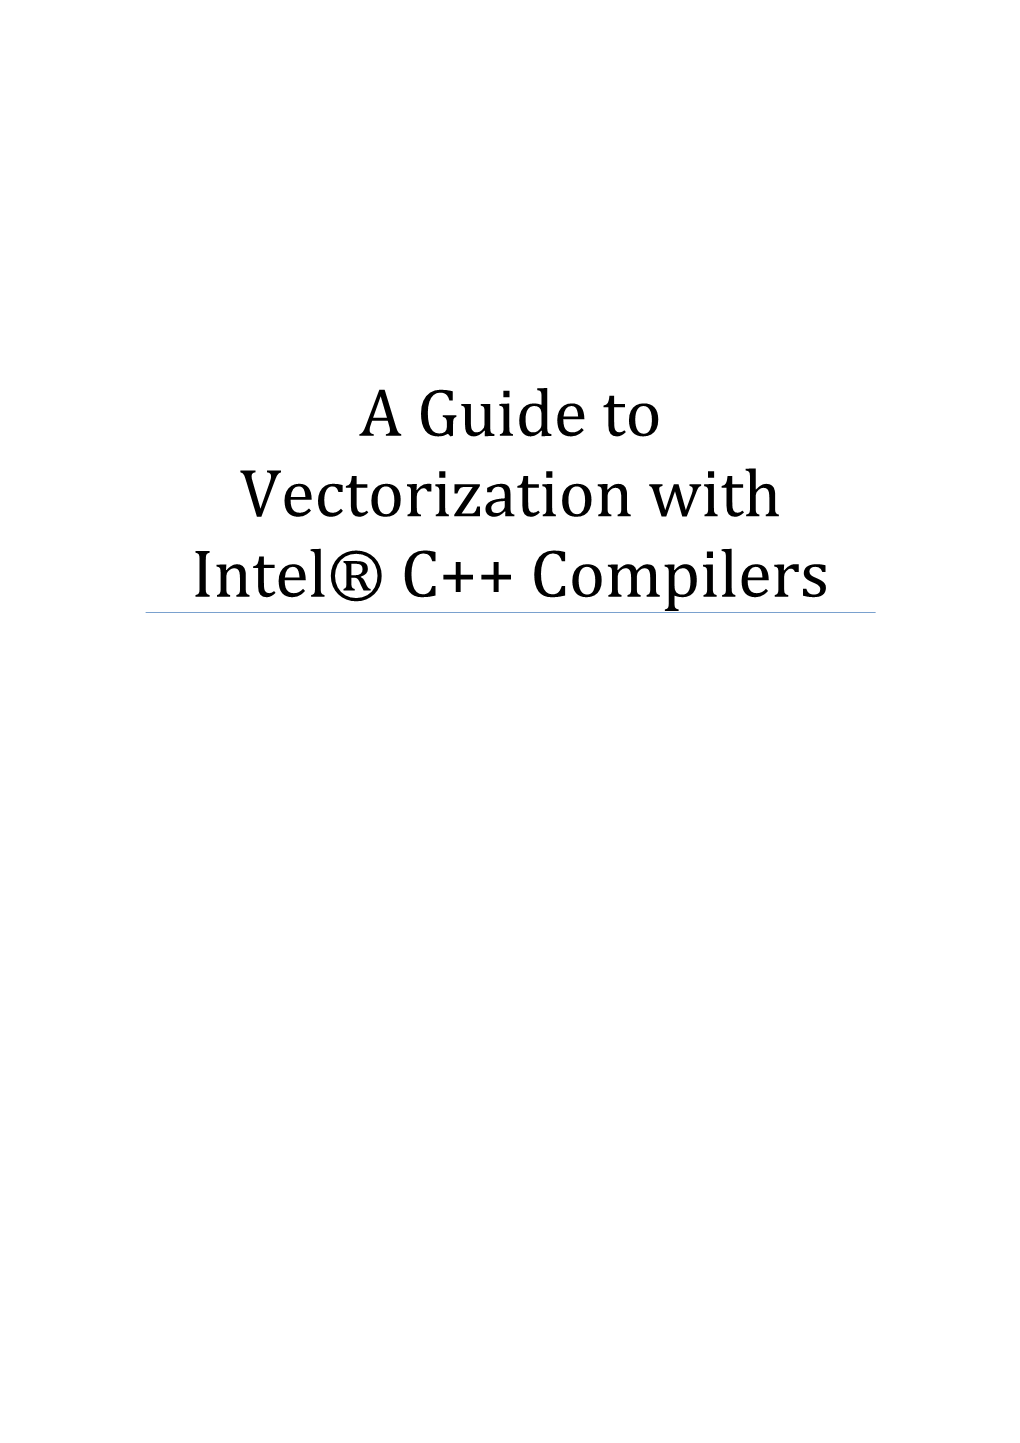 A Guide to Vectorization with Intel® C++ Compilers